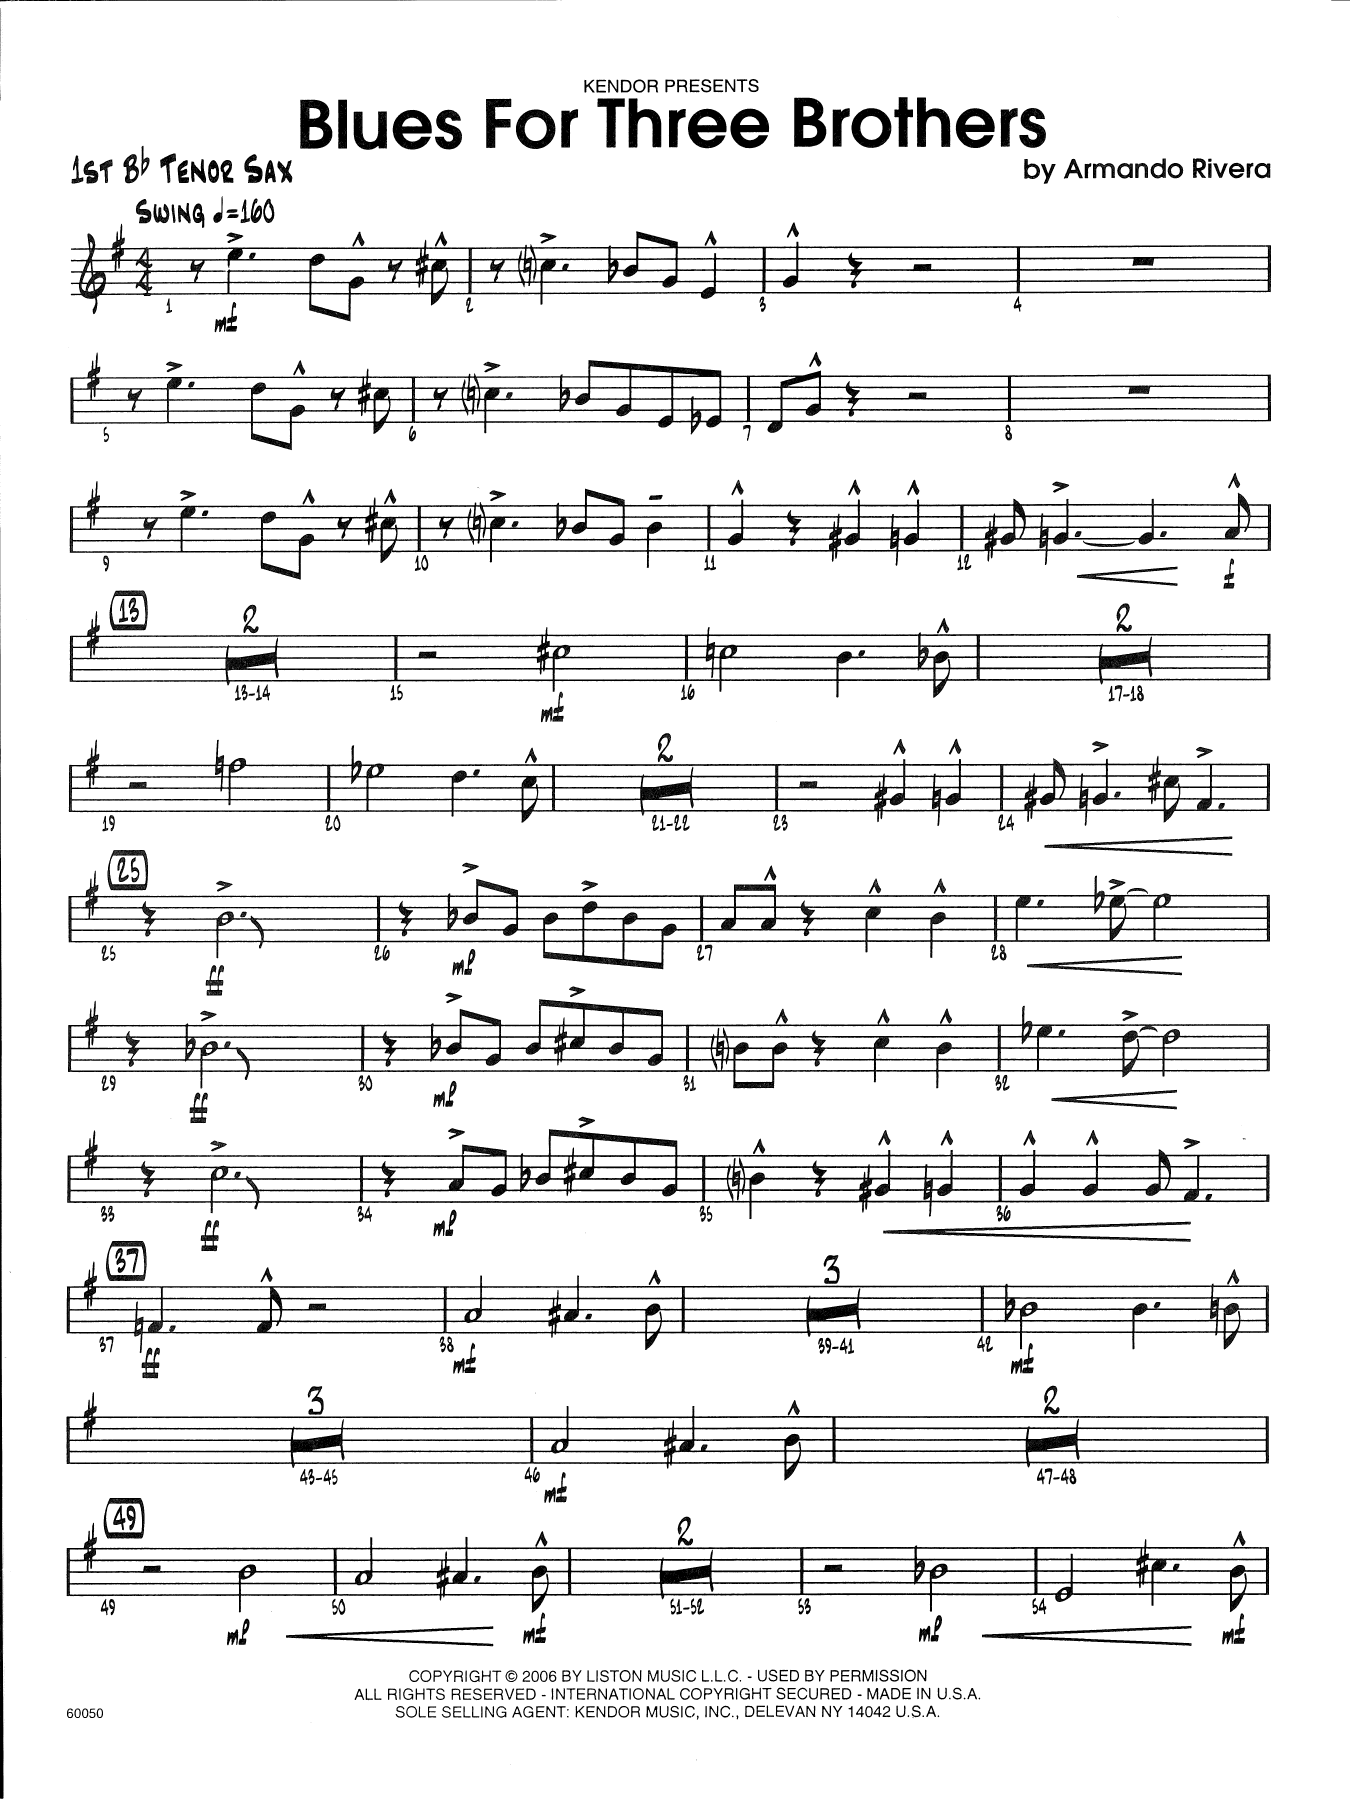 Armando Rivera Blues For Three Brothers - 1st Tenor Saxophone sheet music preview music notes and score for Jazz Ensemble including 2 page(s)